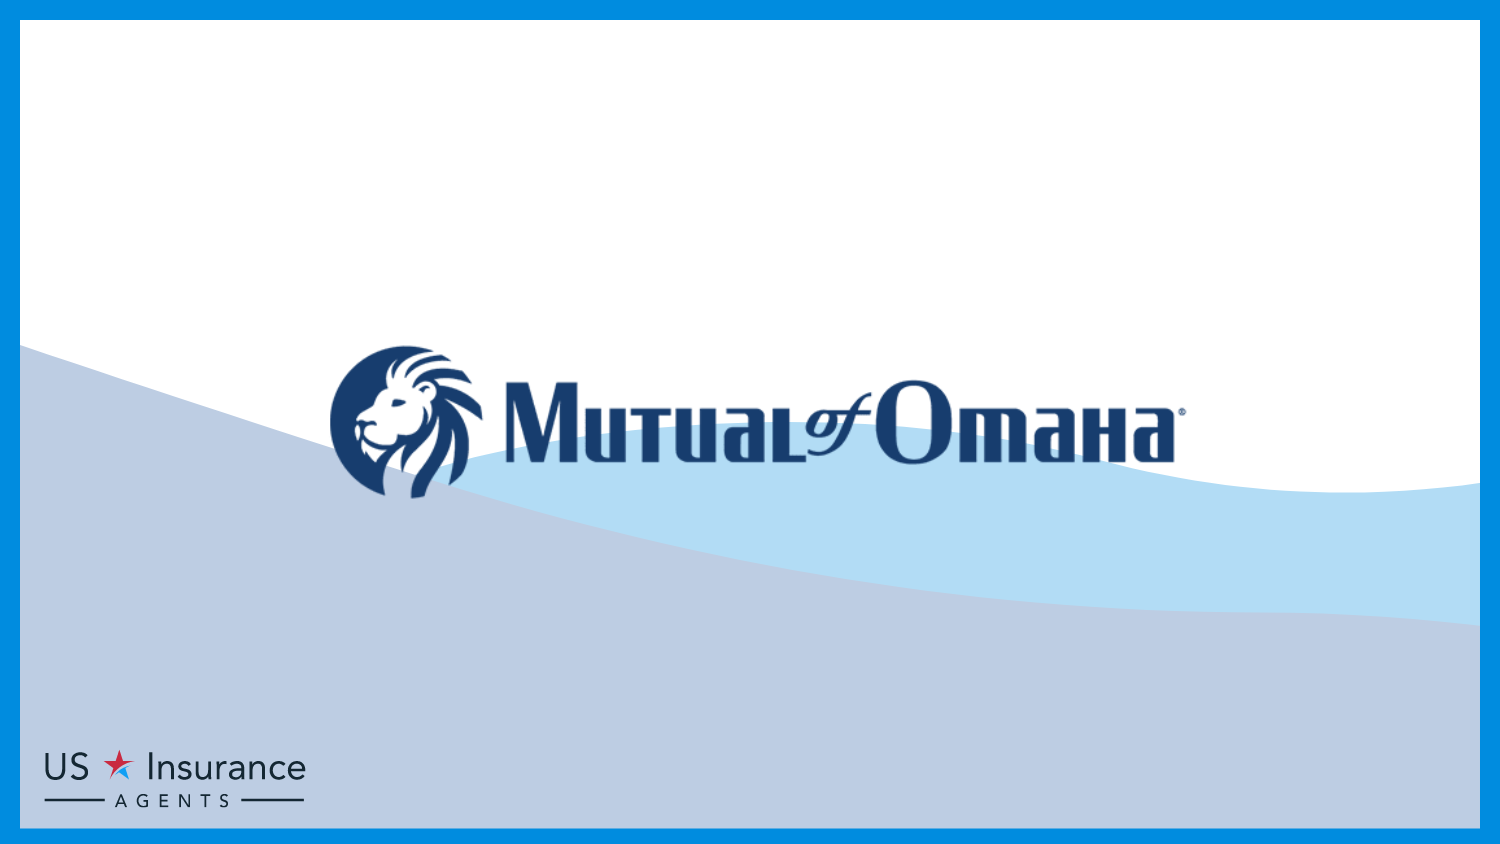 Mutual of Omaha: Best Life Insurance for Overweight People